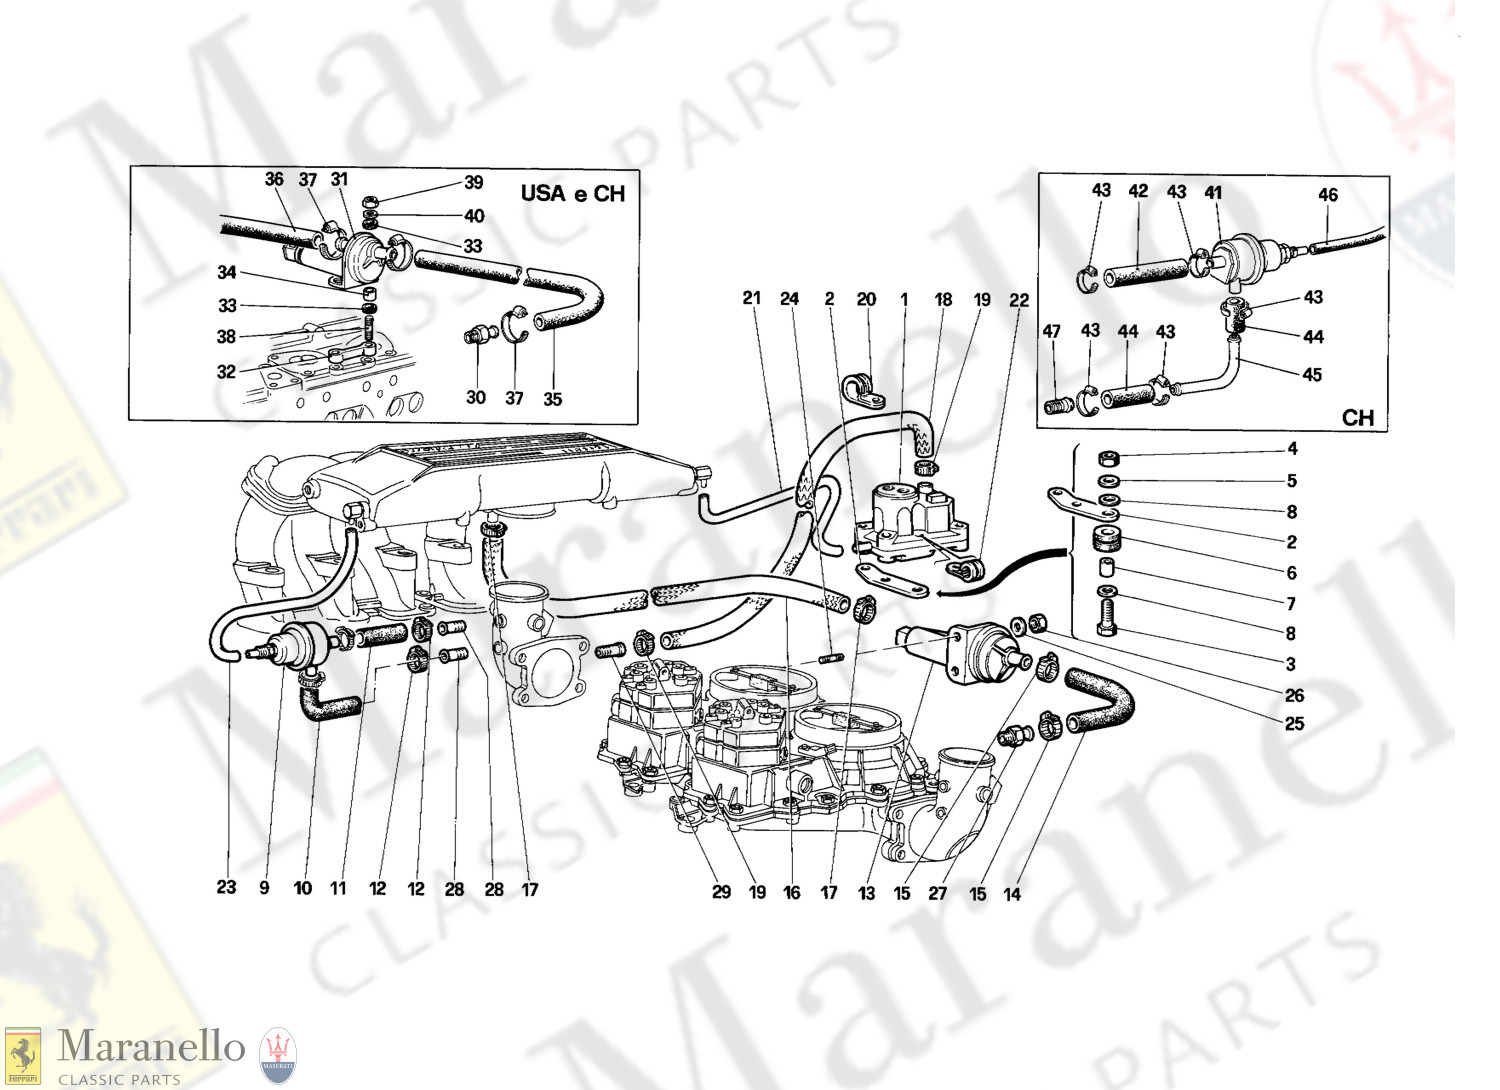 013 - Fuel Injection System - Valves And Lines